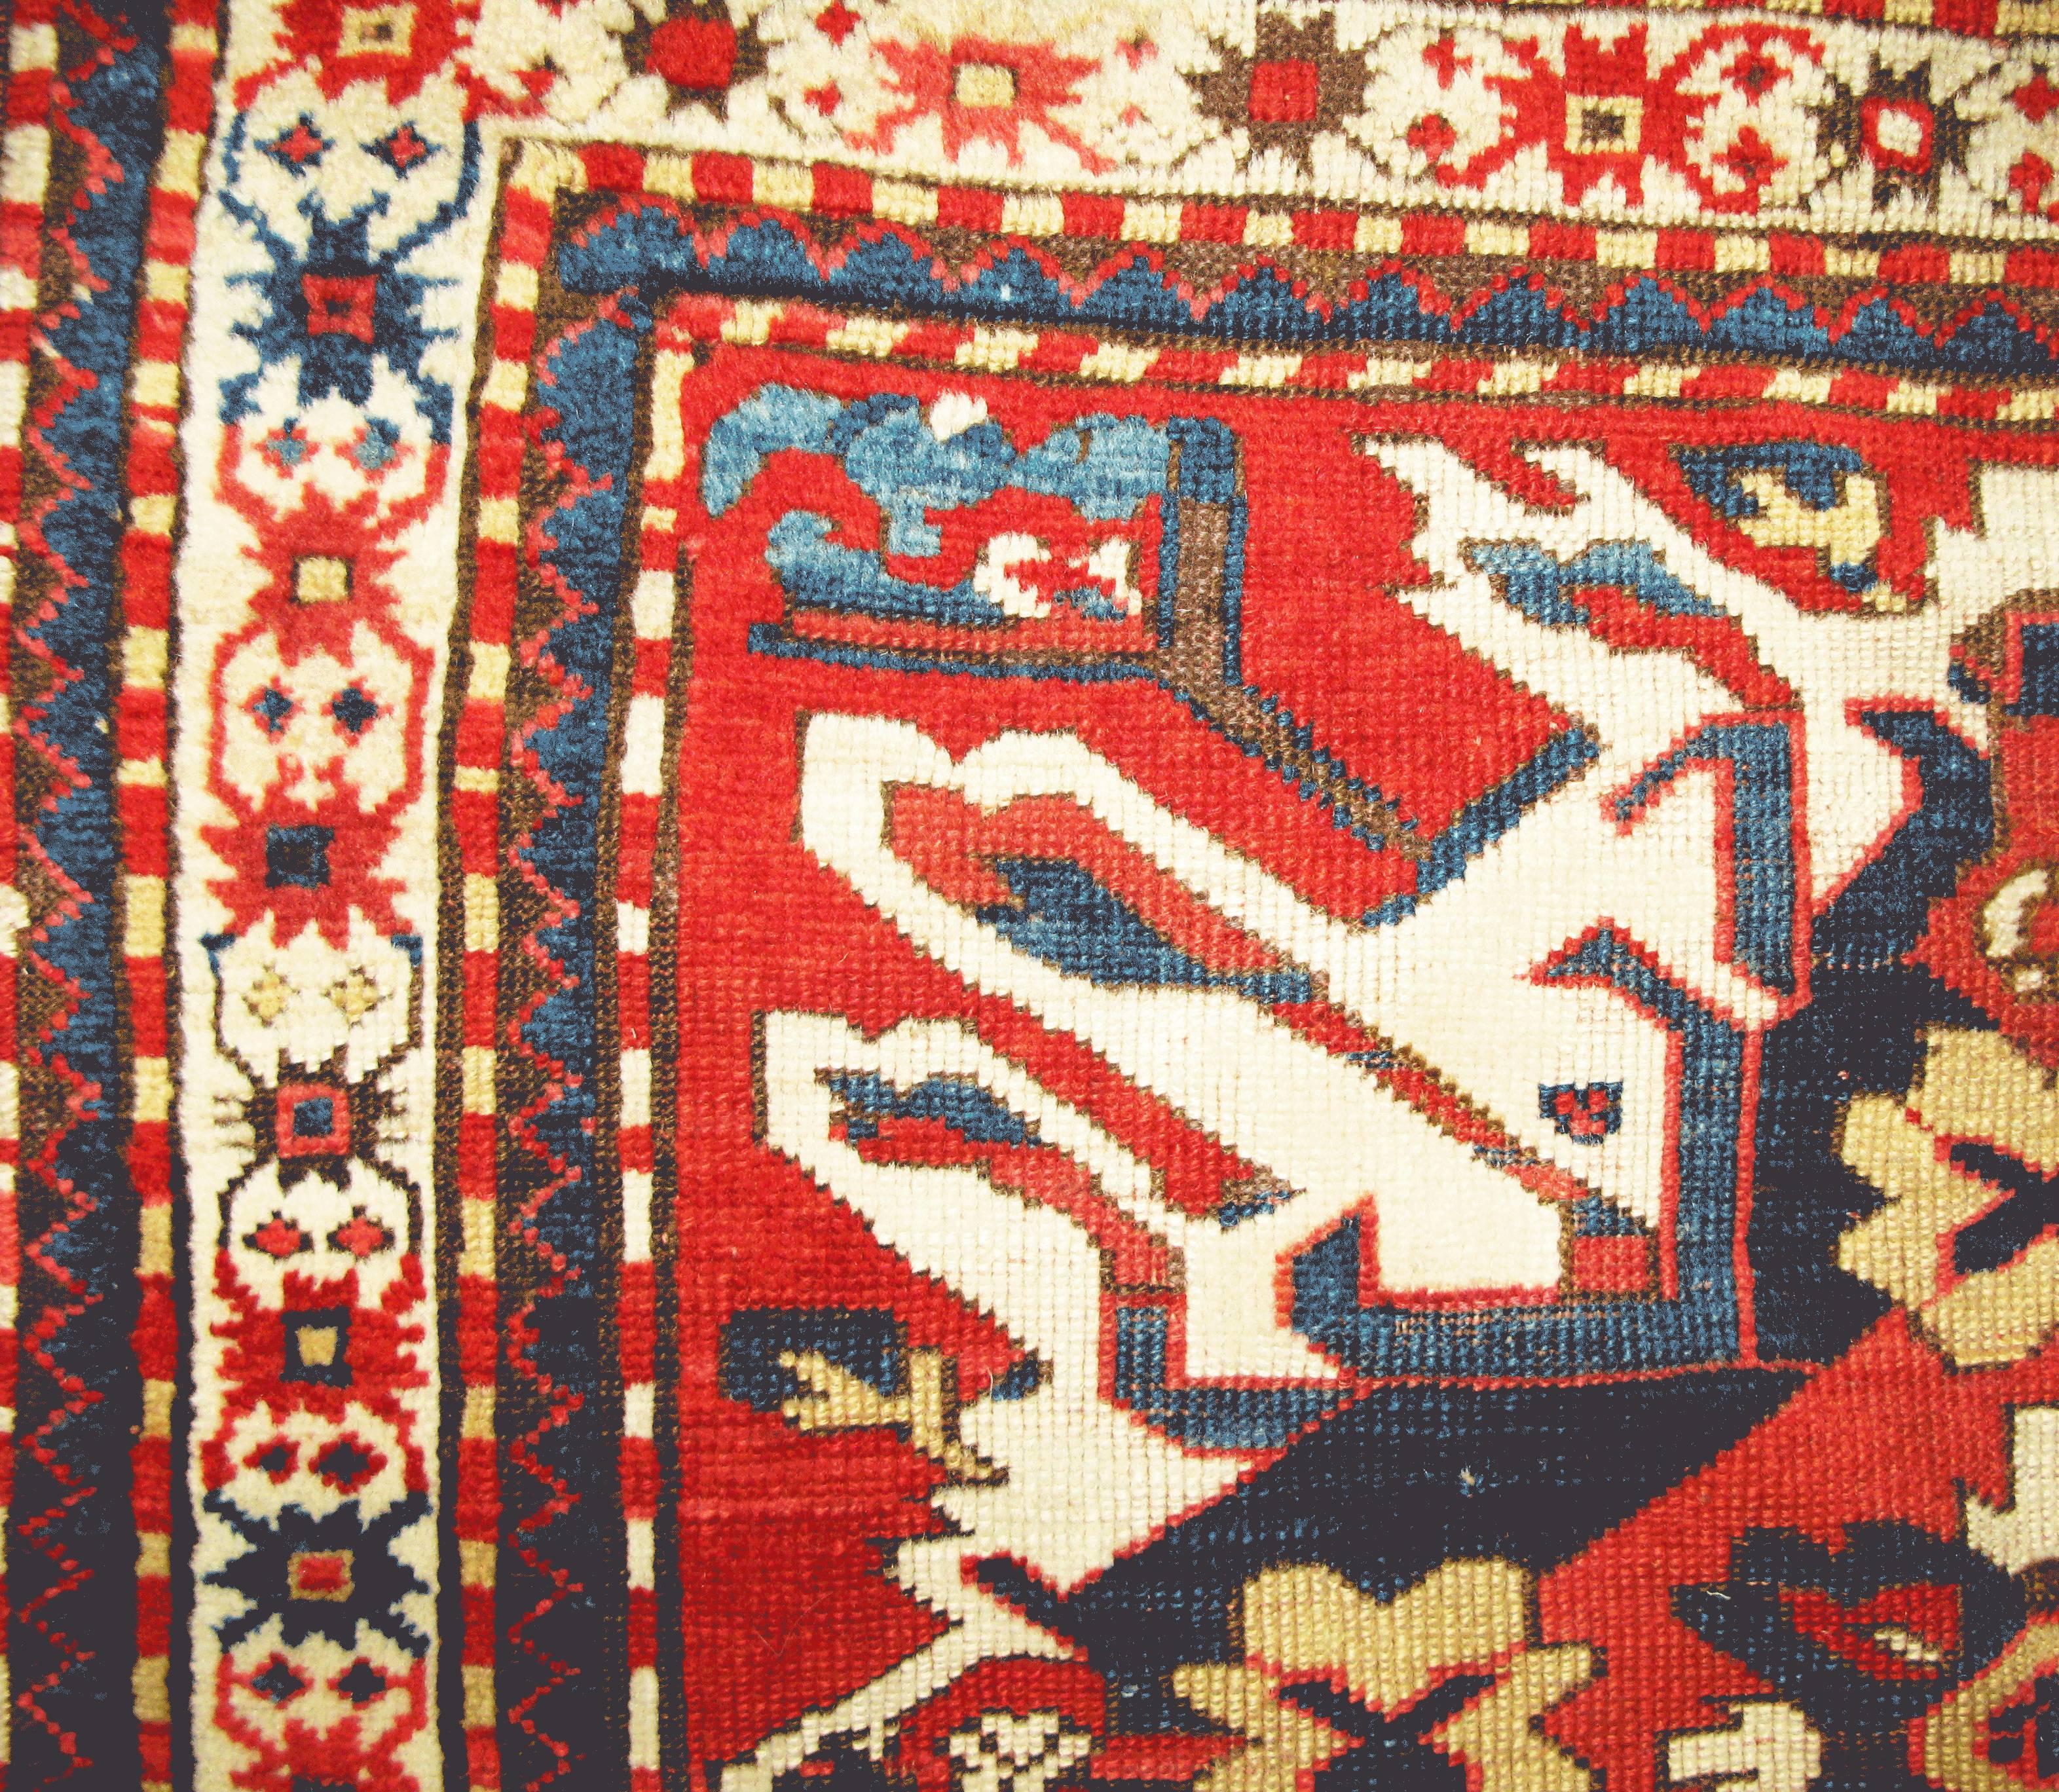 Antique Caucasian Eagle Kazak rug. Were made in the southeast Caucasus, bordering northern Persia. The Caucasus mountain range stretches from the Caspian Sea to the Black Sea in the area of modern-day Azerbaijan and southern Russia, and it is in the